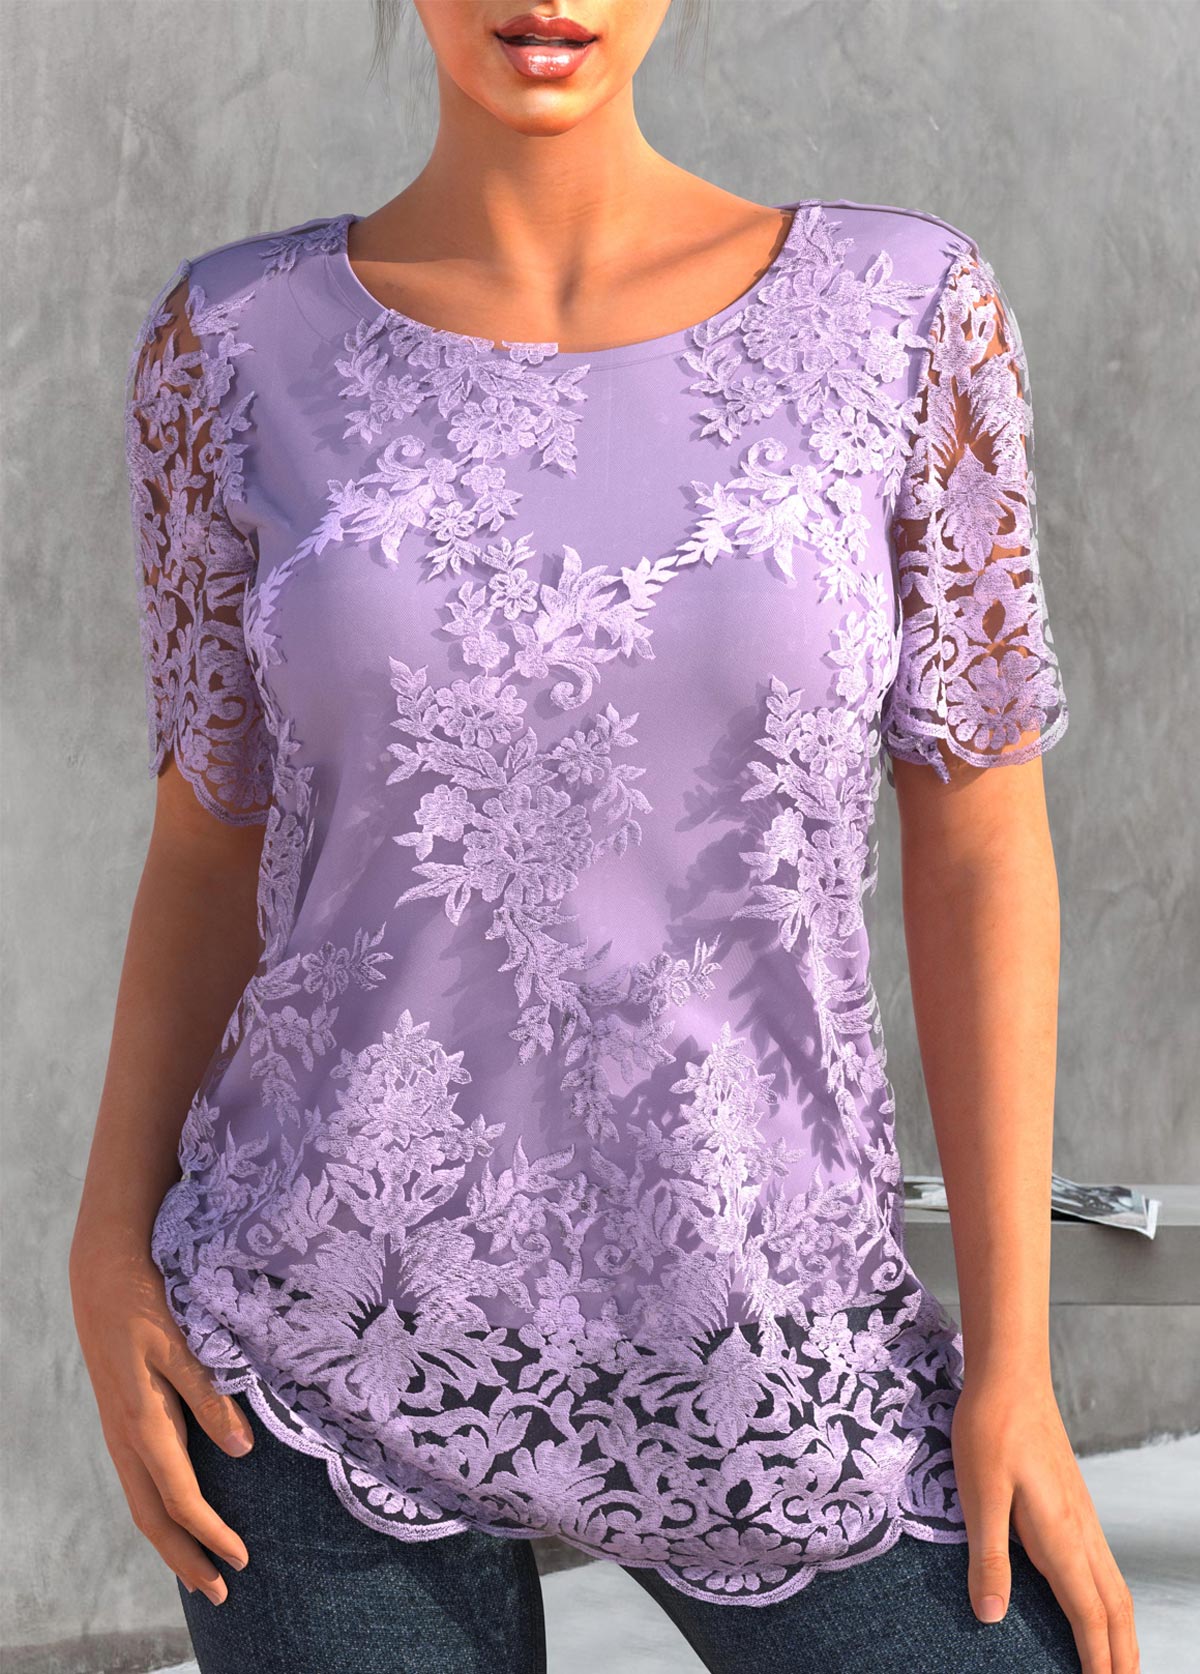 Lace Embroidered Light Purple 3/4 Sleeve T Shirt